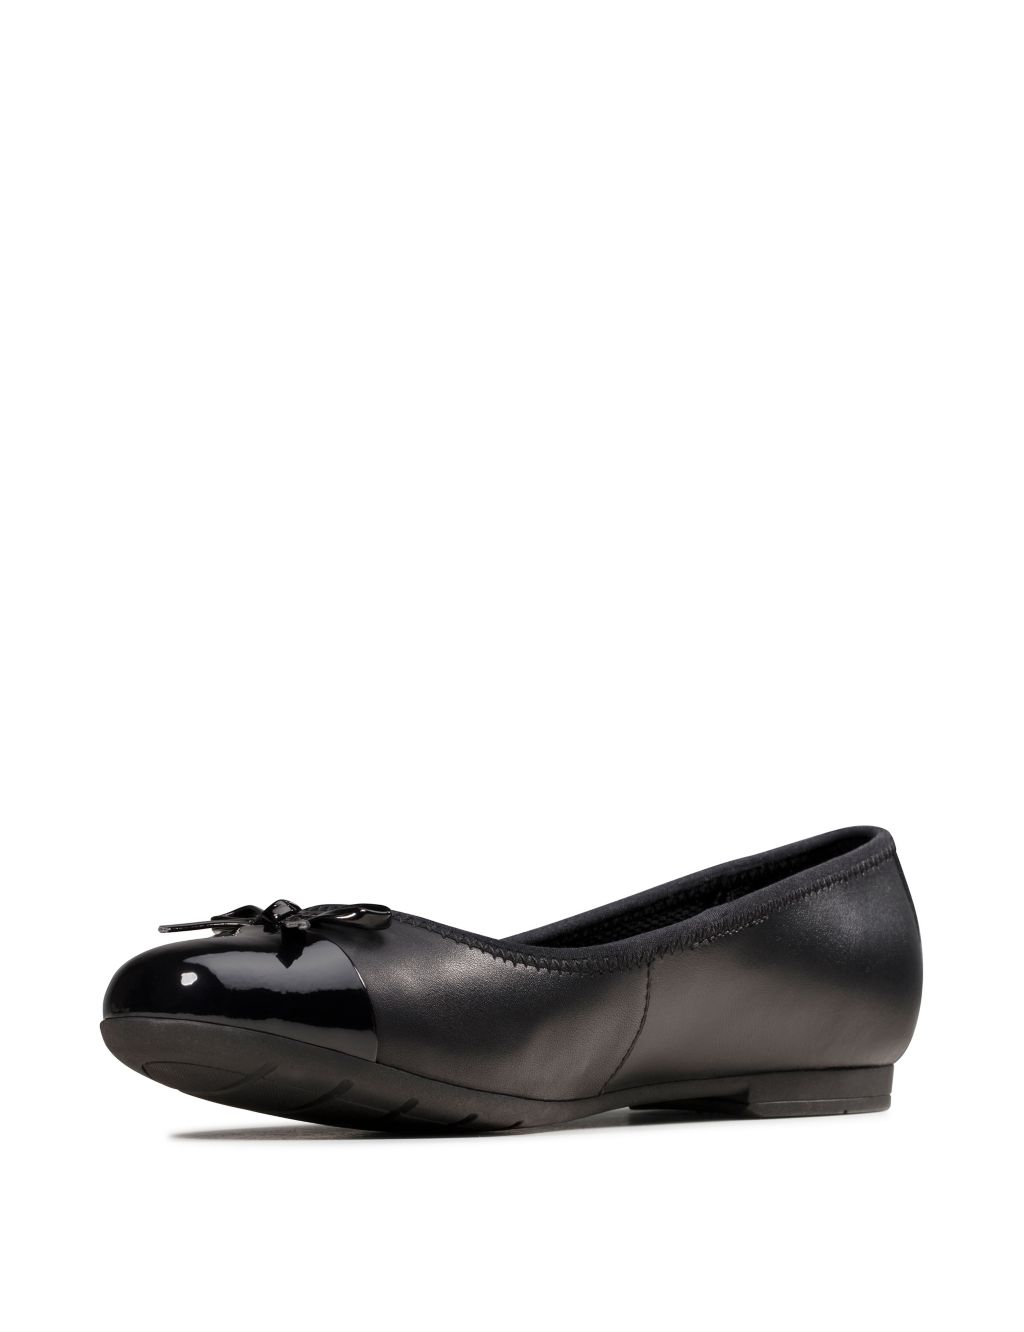 Kids' Leather Bow Ballet Pumps (3 Small - 5½ Small) image 3